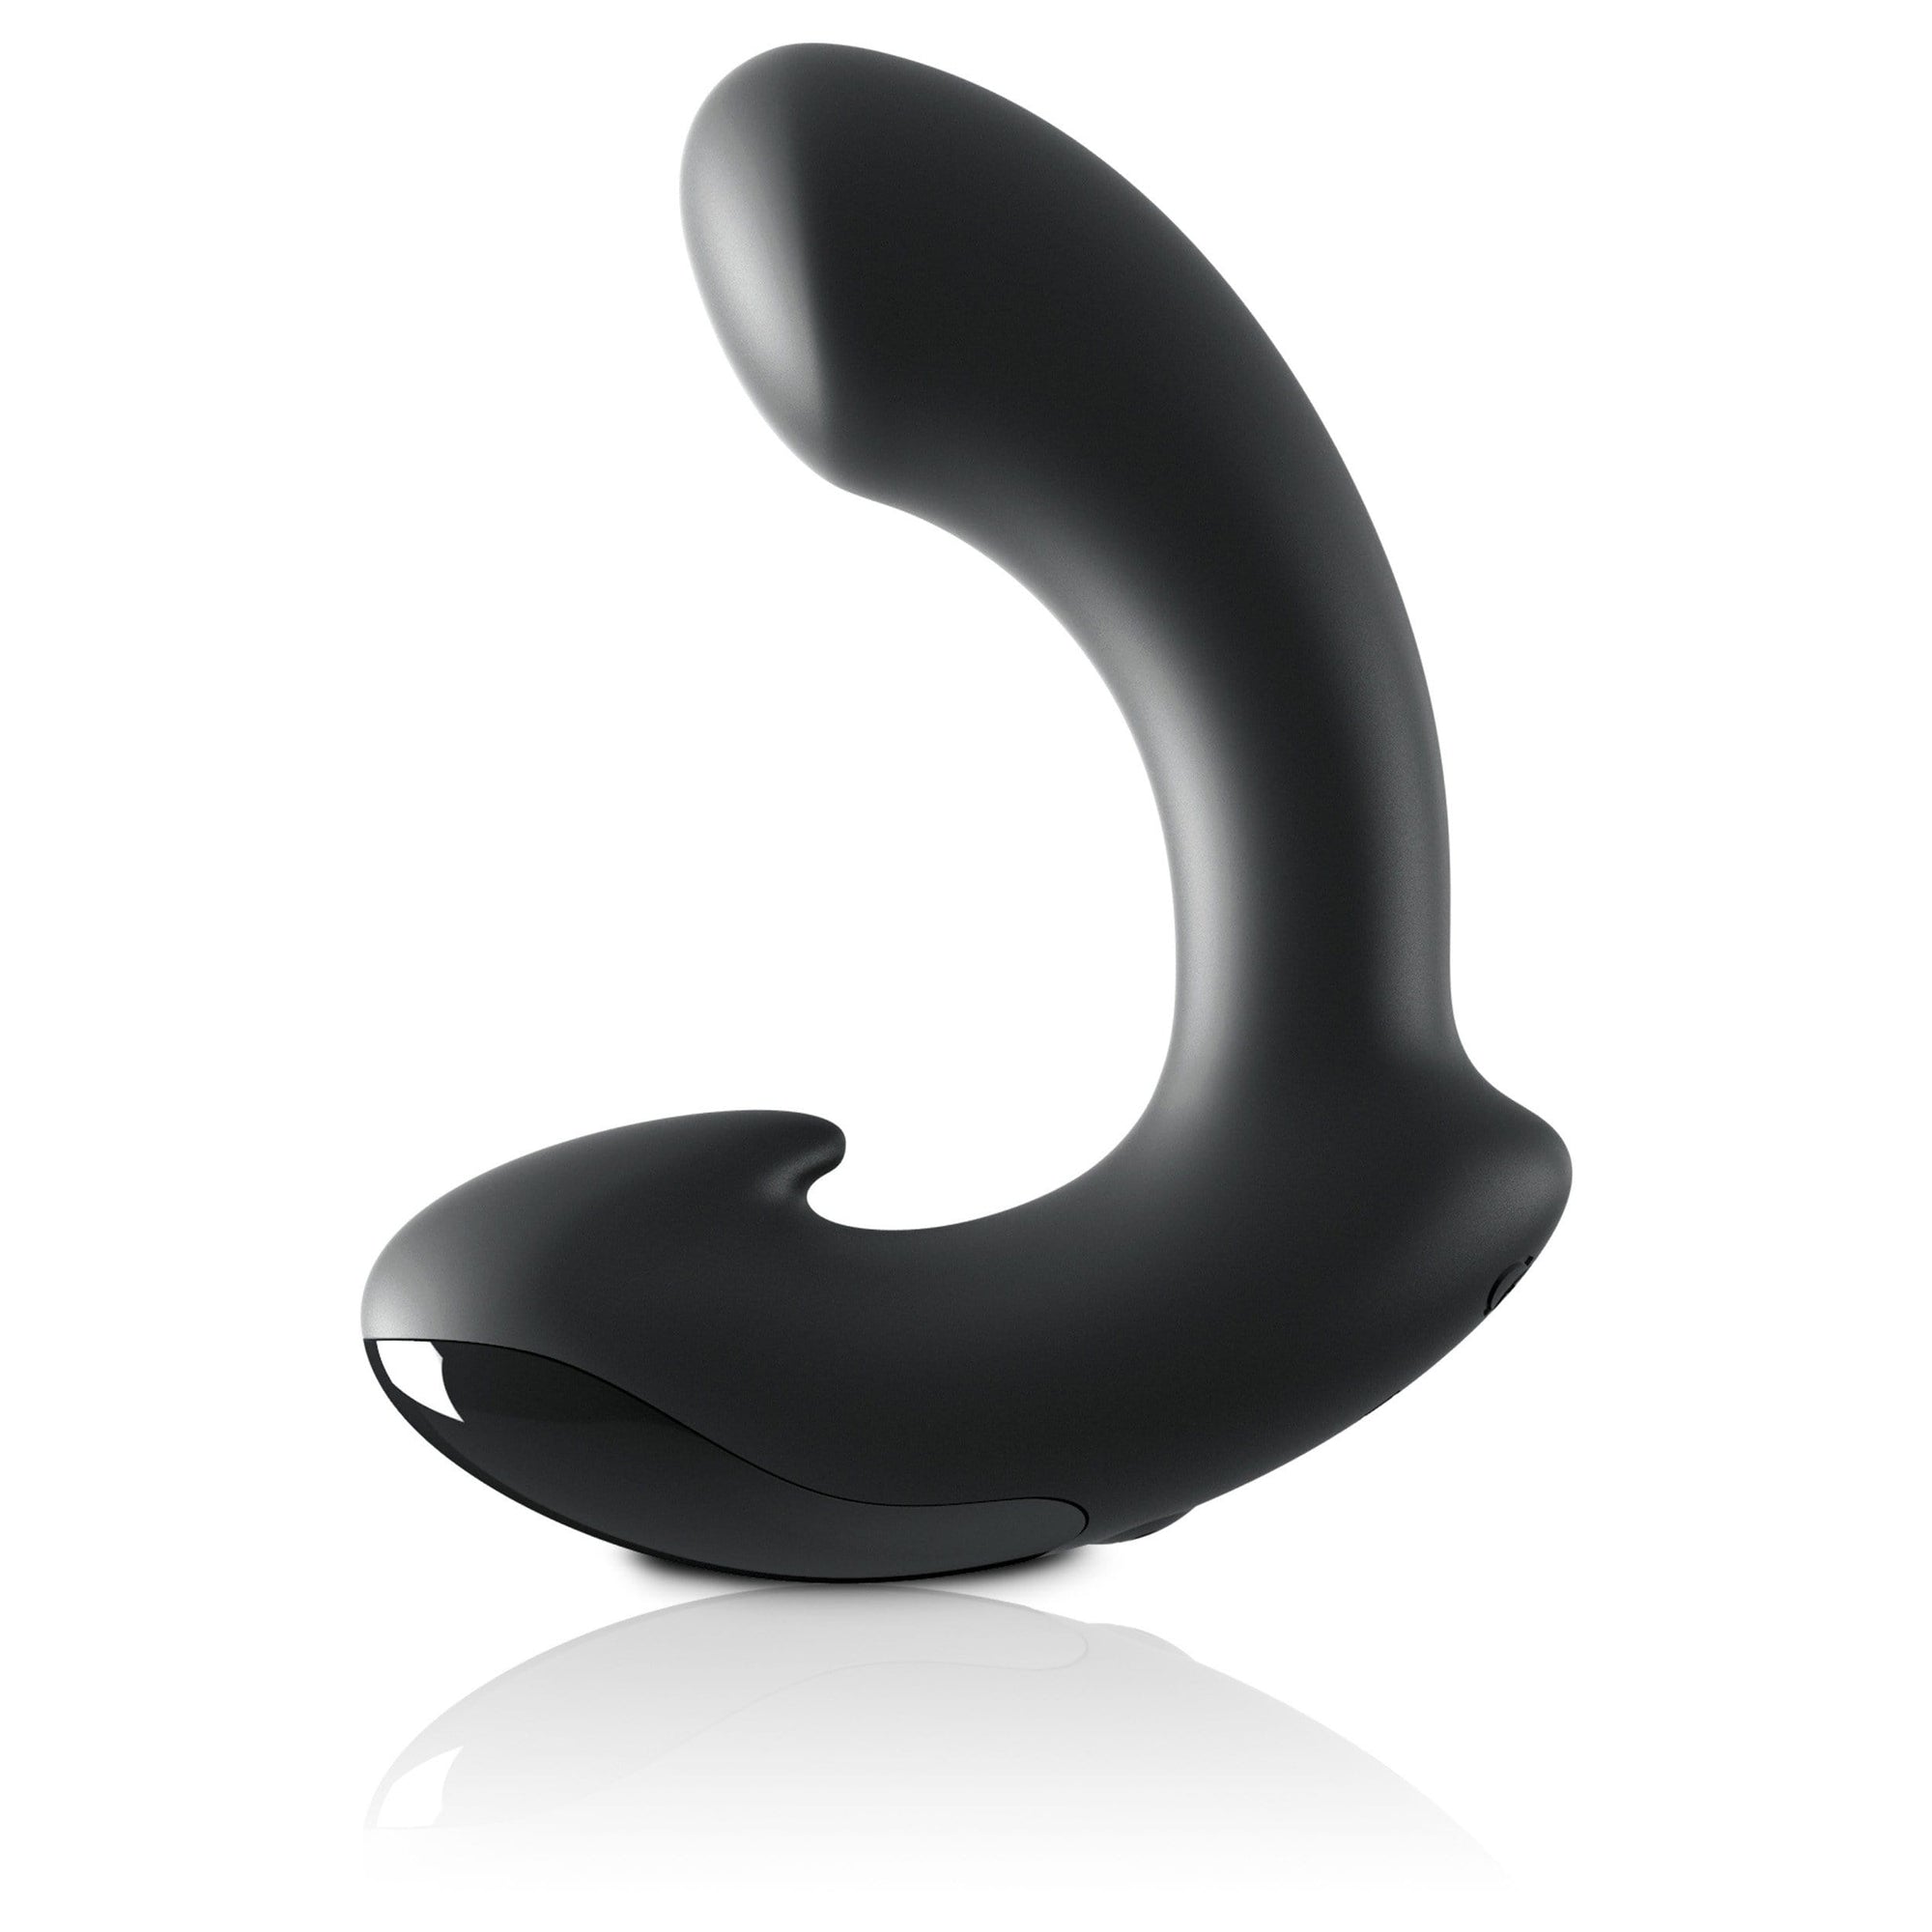 Sir Richards - Control Silicone P-Spot Massager (Black) -  Prostate Massager (Vibration) Rechargeable  Durio.sg